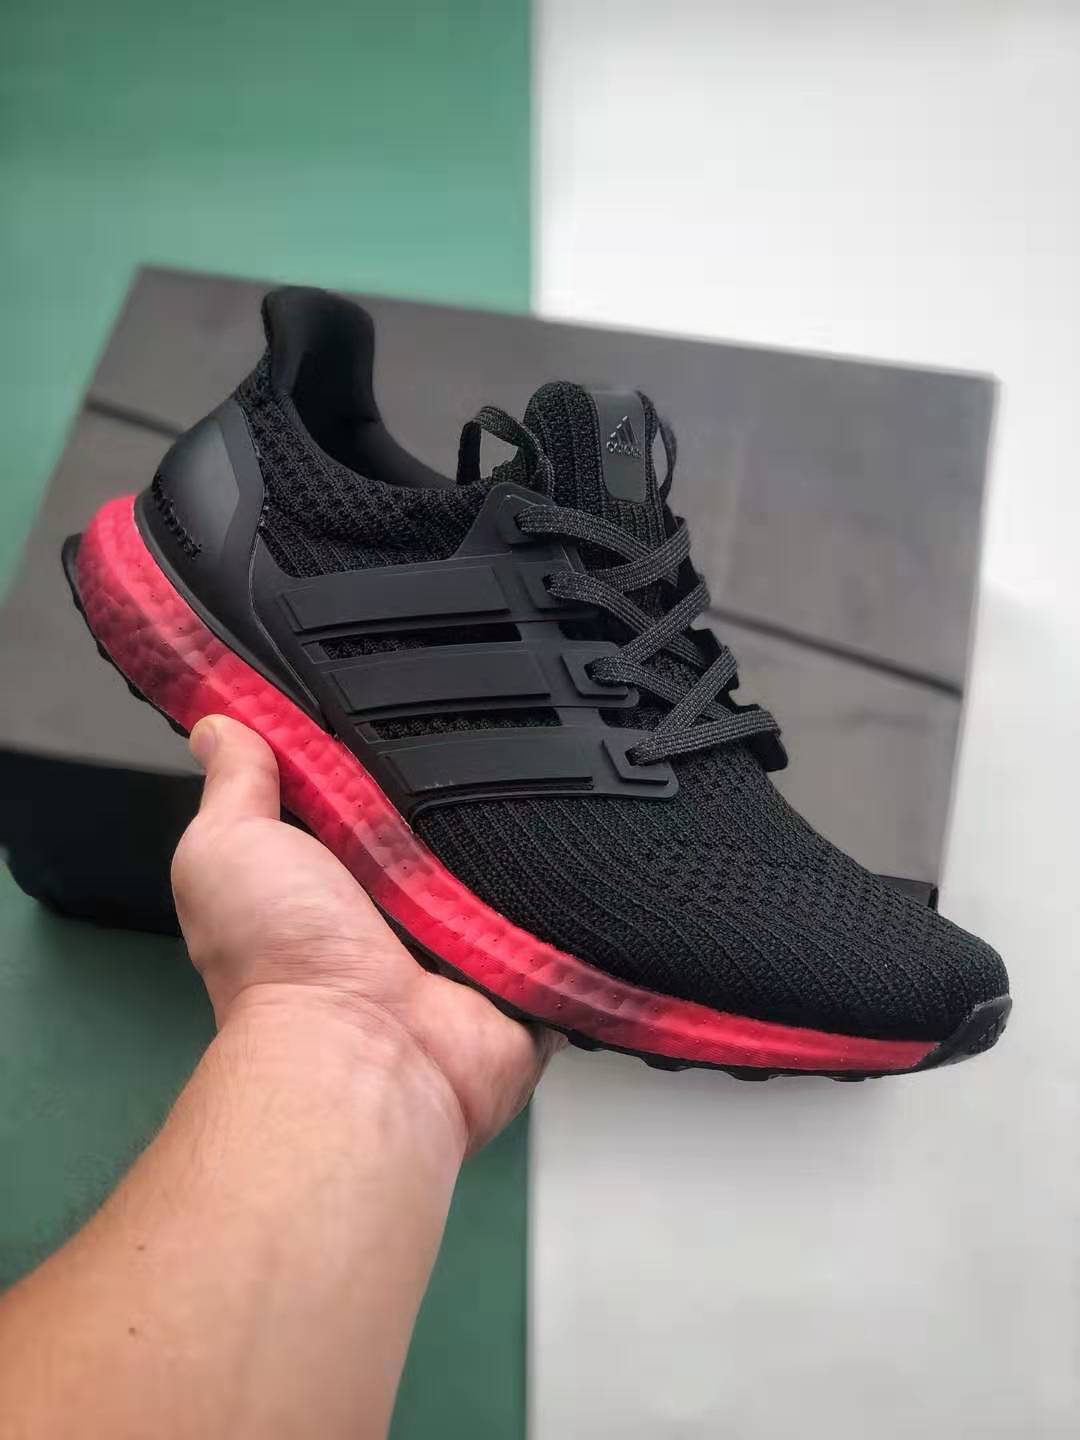 Adidas UltraBoost 'Rainbow Pack - Red' FV7282: Stylish and Vibrant Sneakers